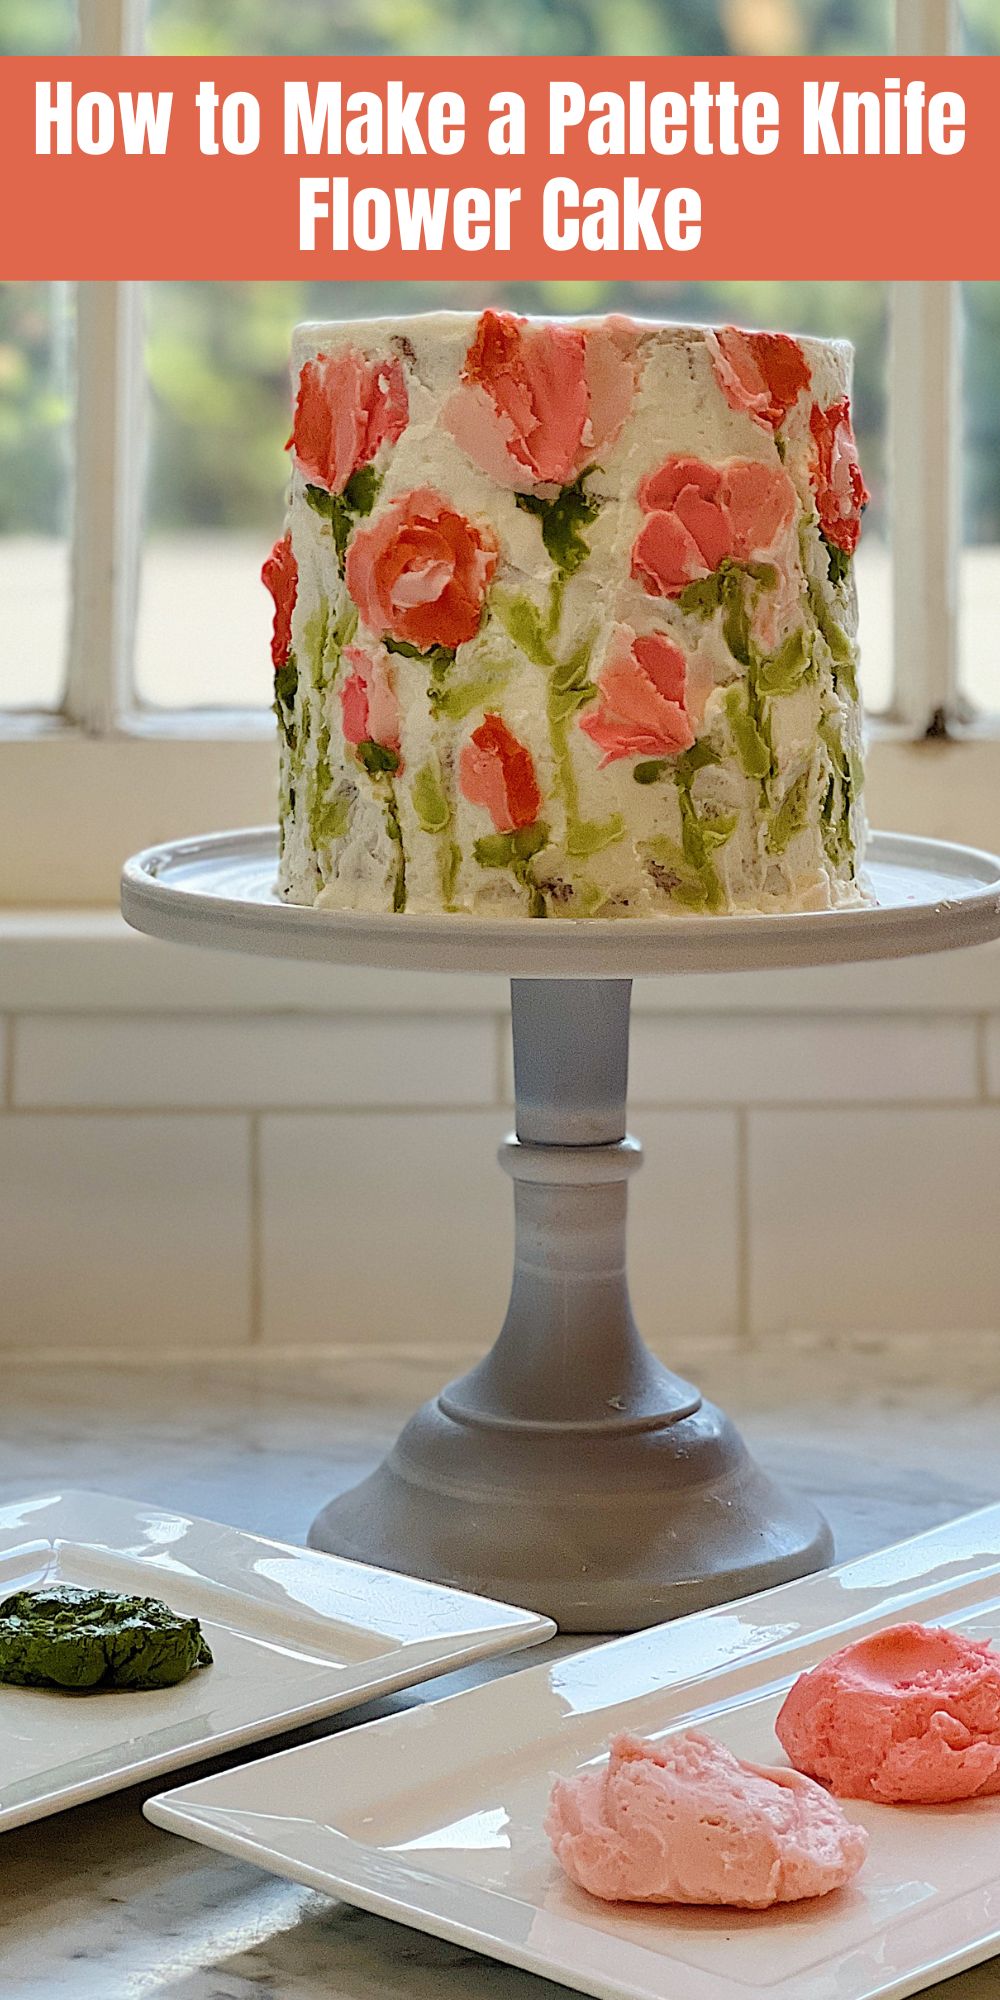 I am always looking for fun ways to incorporate my art background into my life today. I just made my first palette knife flower cake!